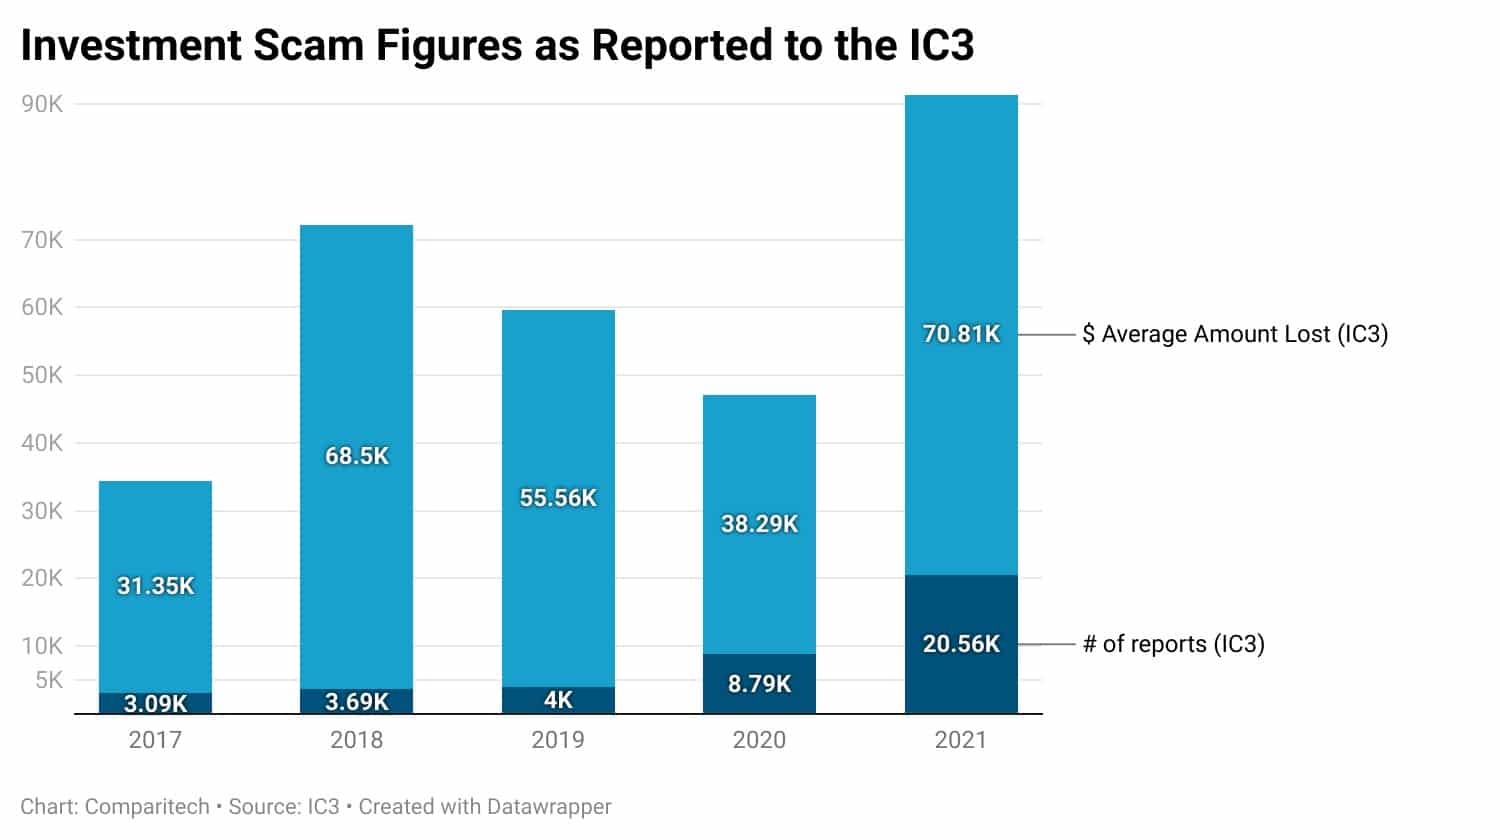 Investment Scams Reported to the IC3